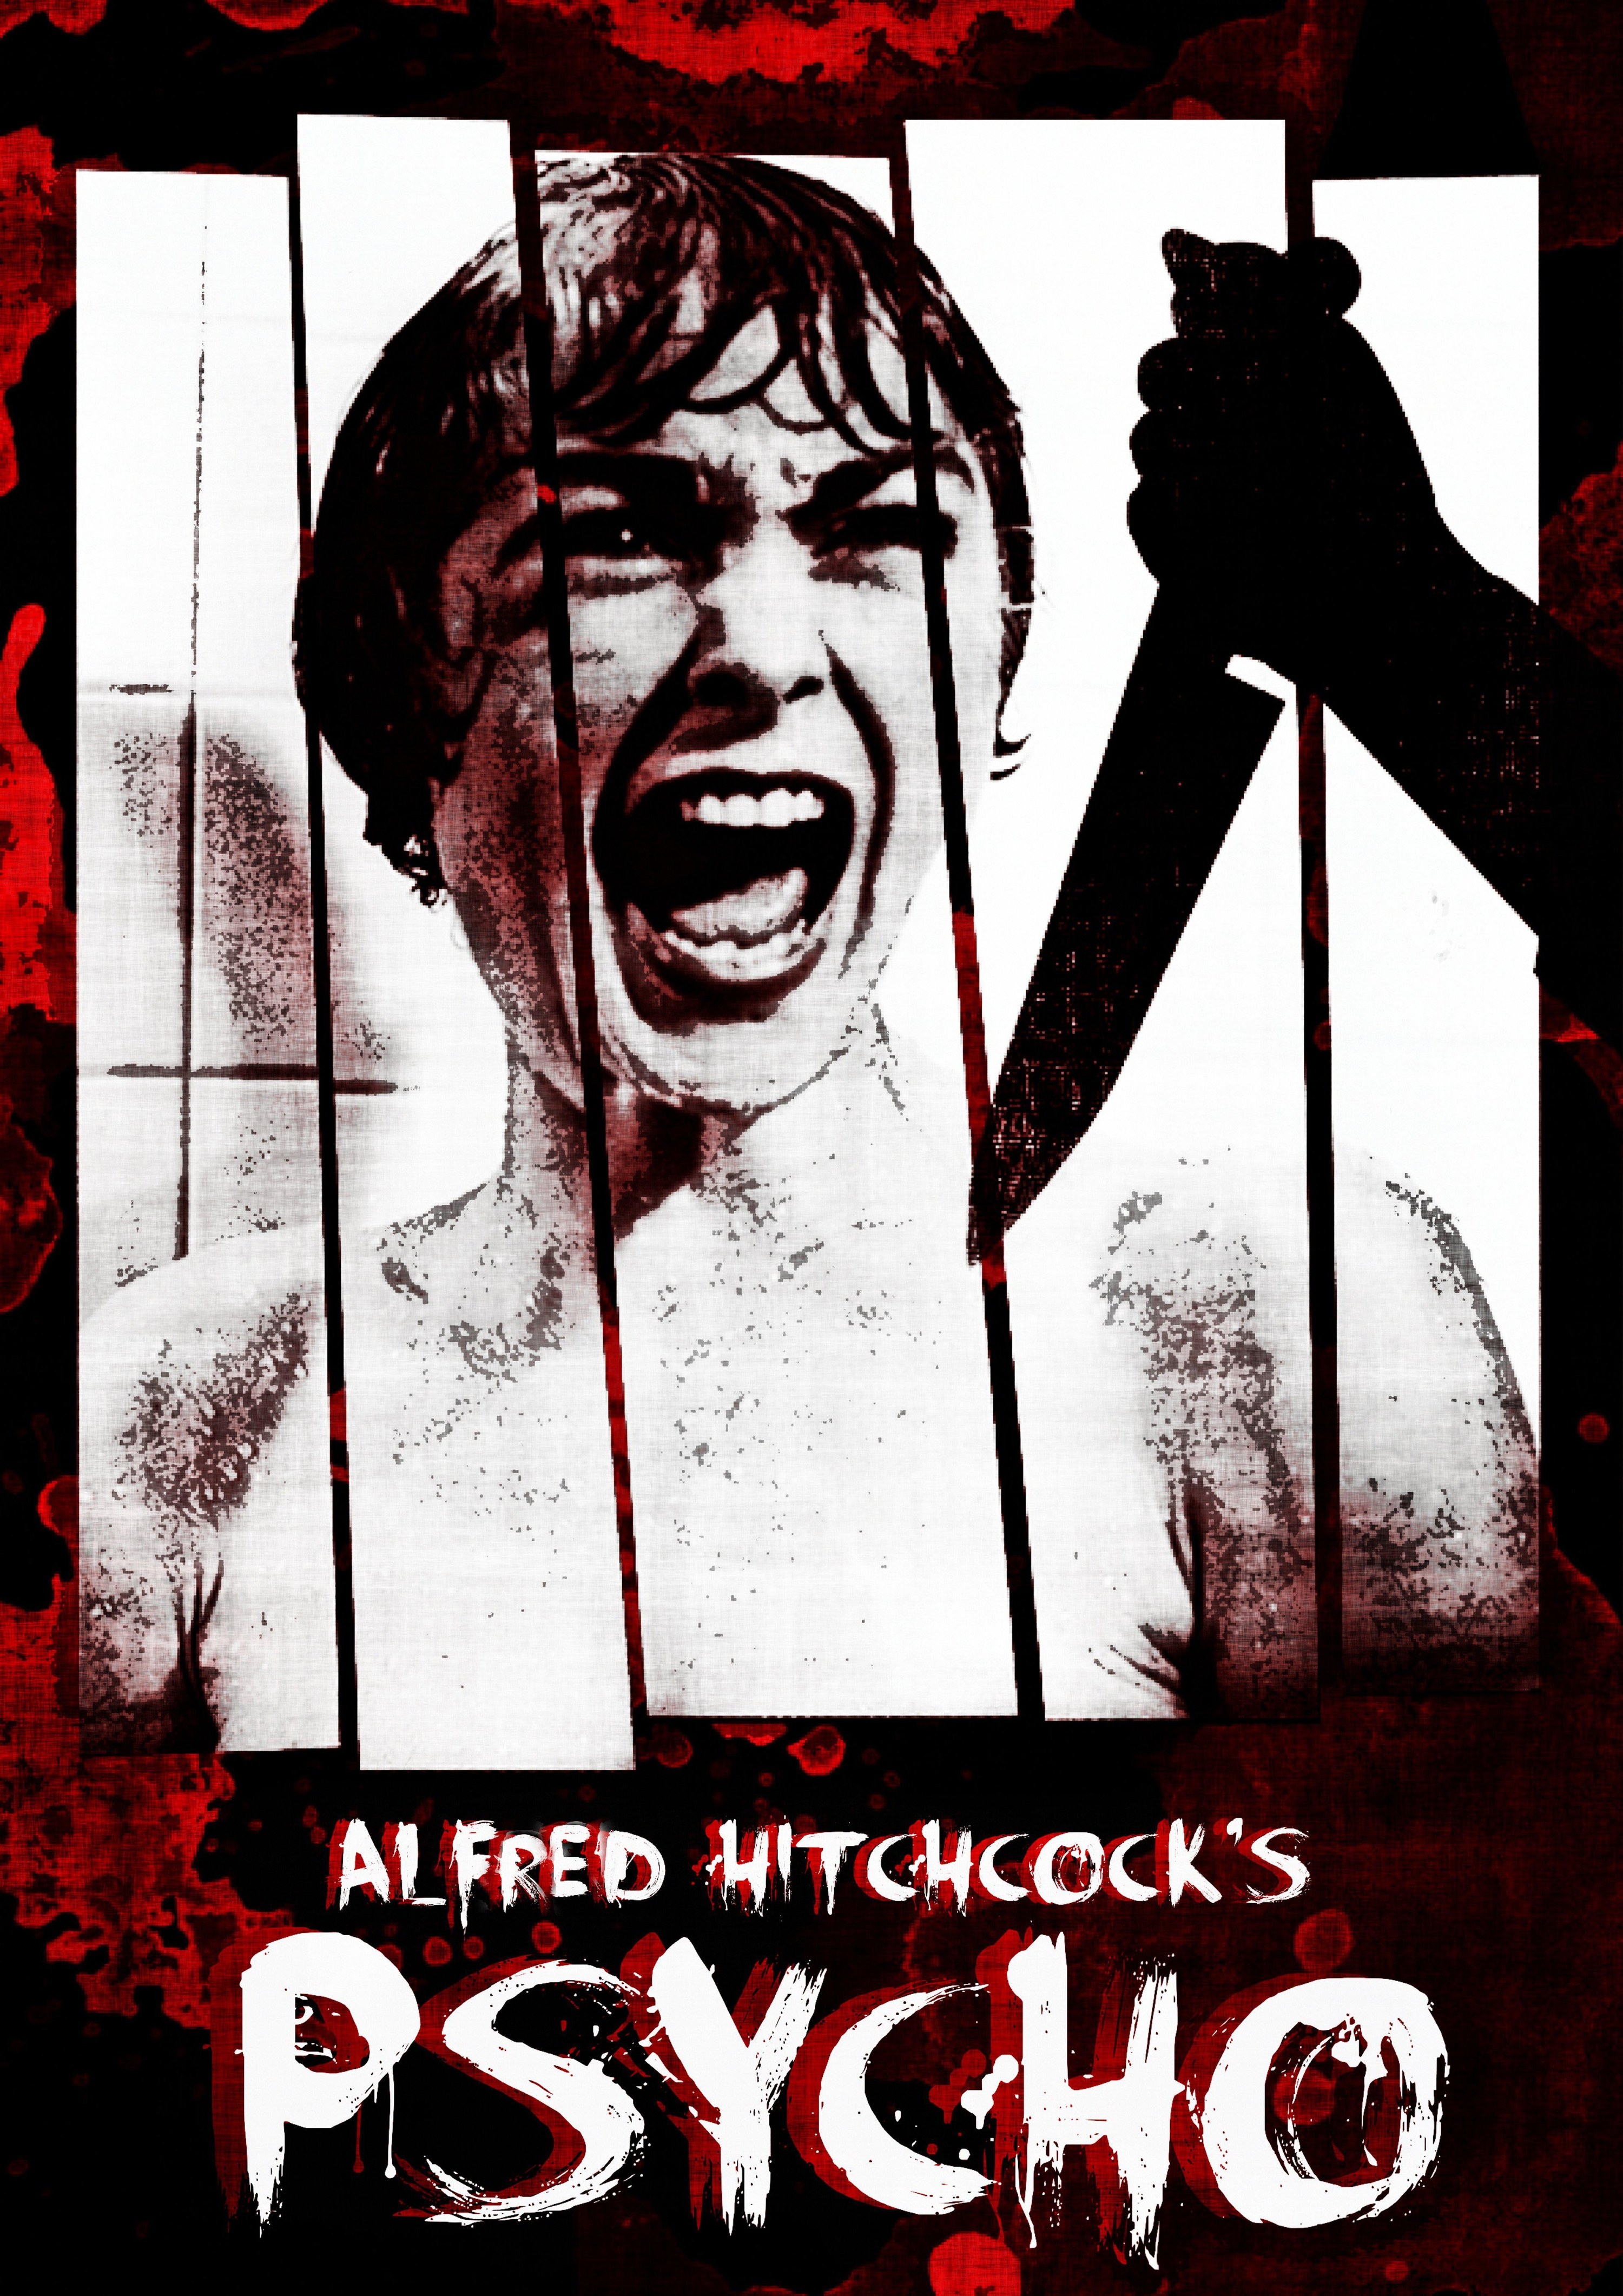 Poster image for the movie &quot;Psycho&quot; depicting Janet Leigh in the shower screaming as a hand with a kitchen knife looms over her